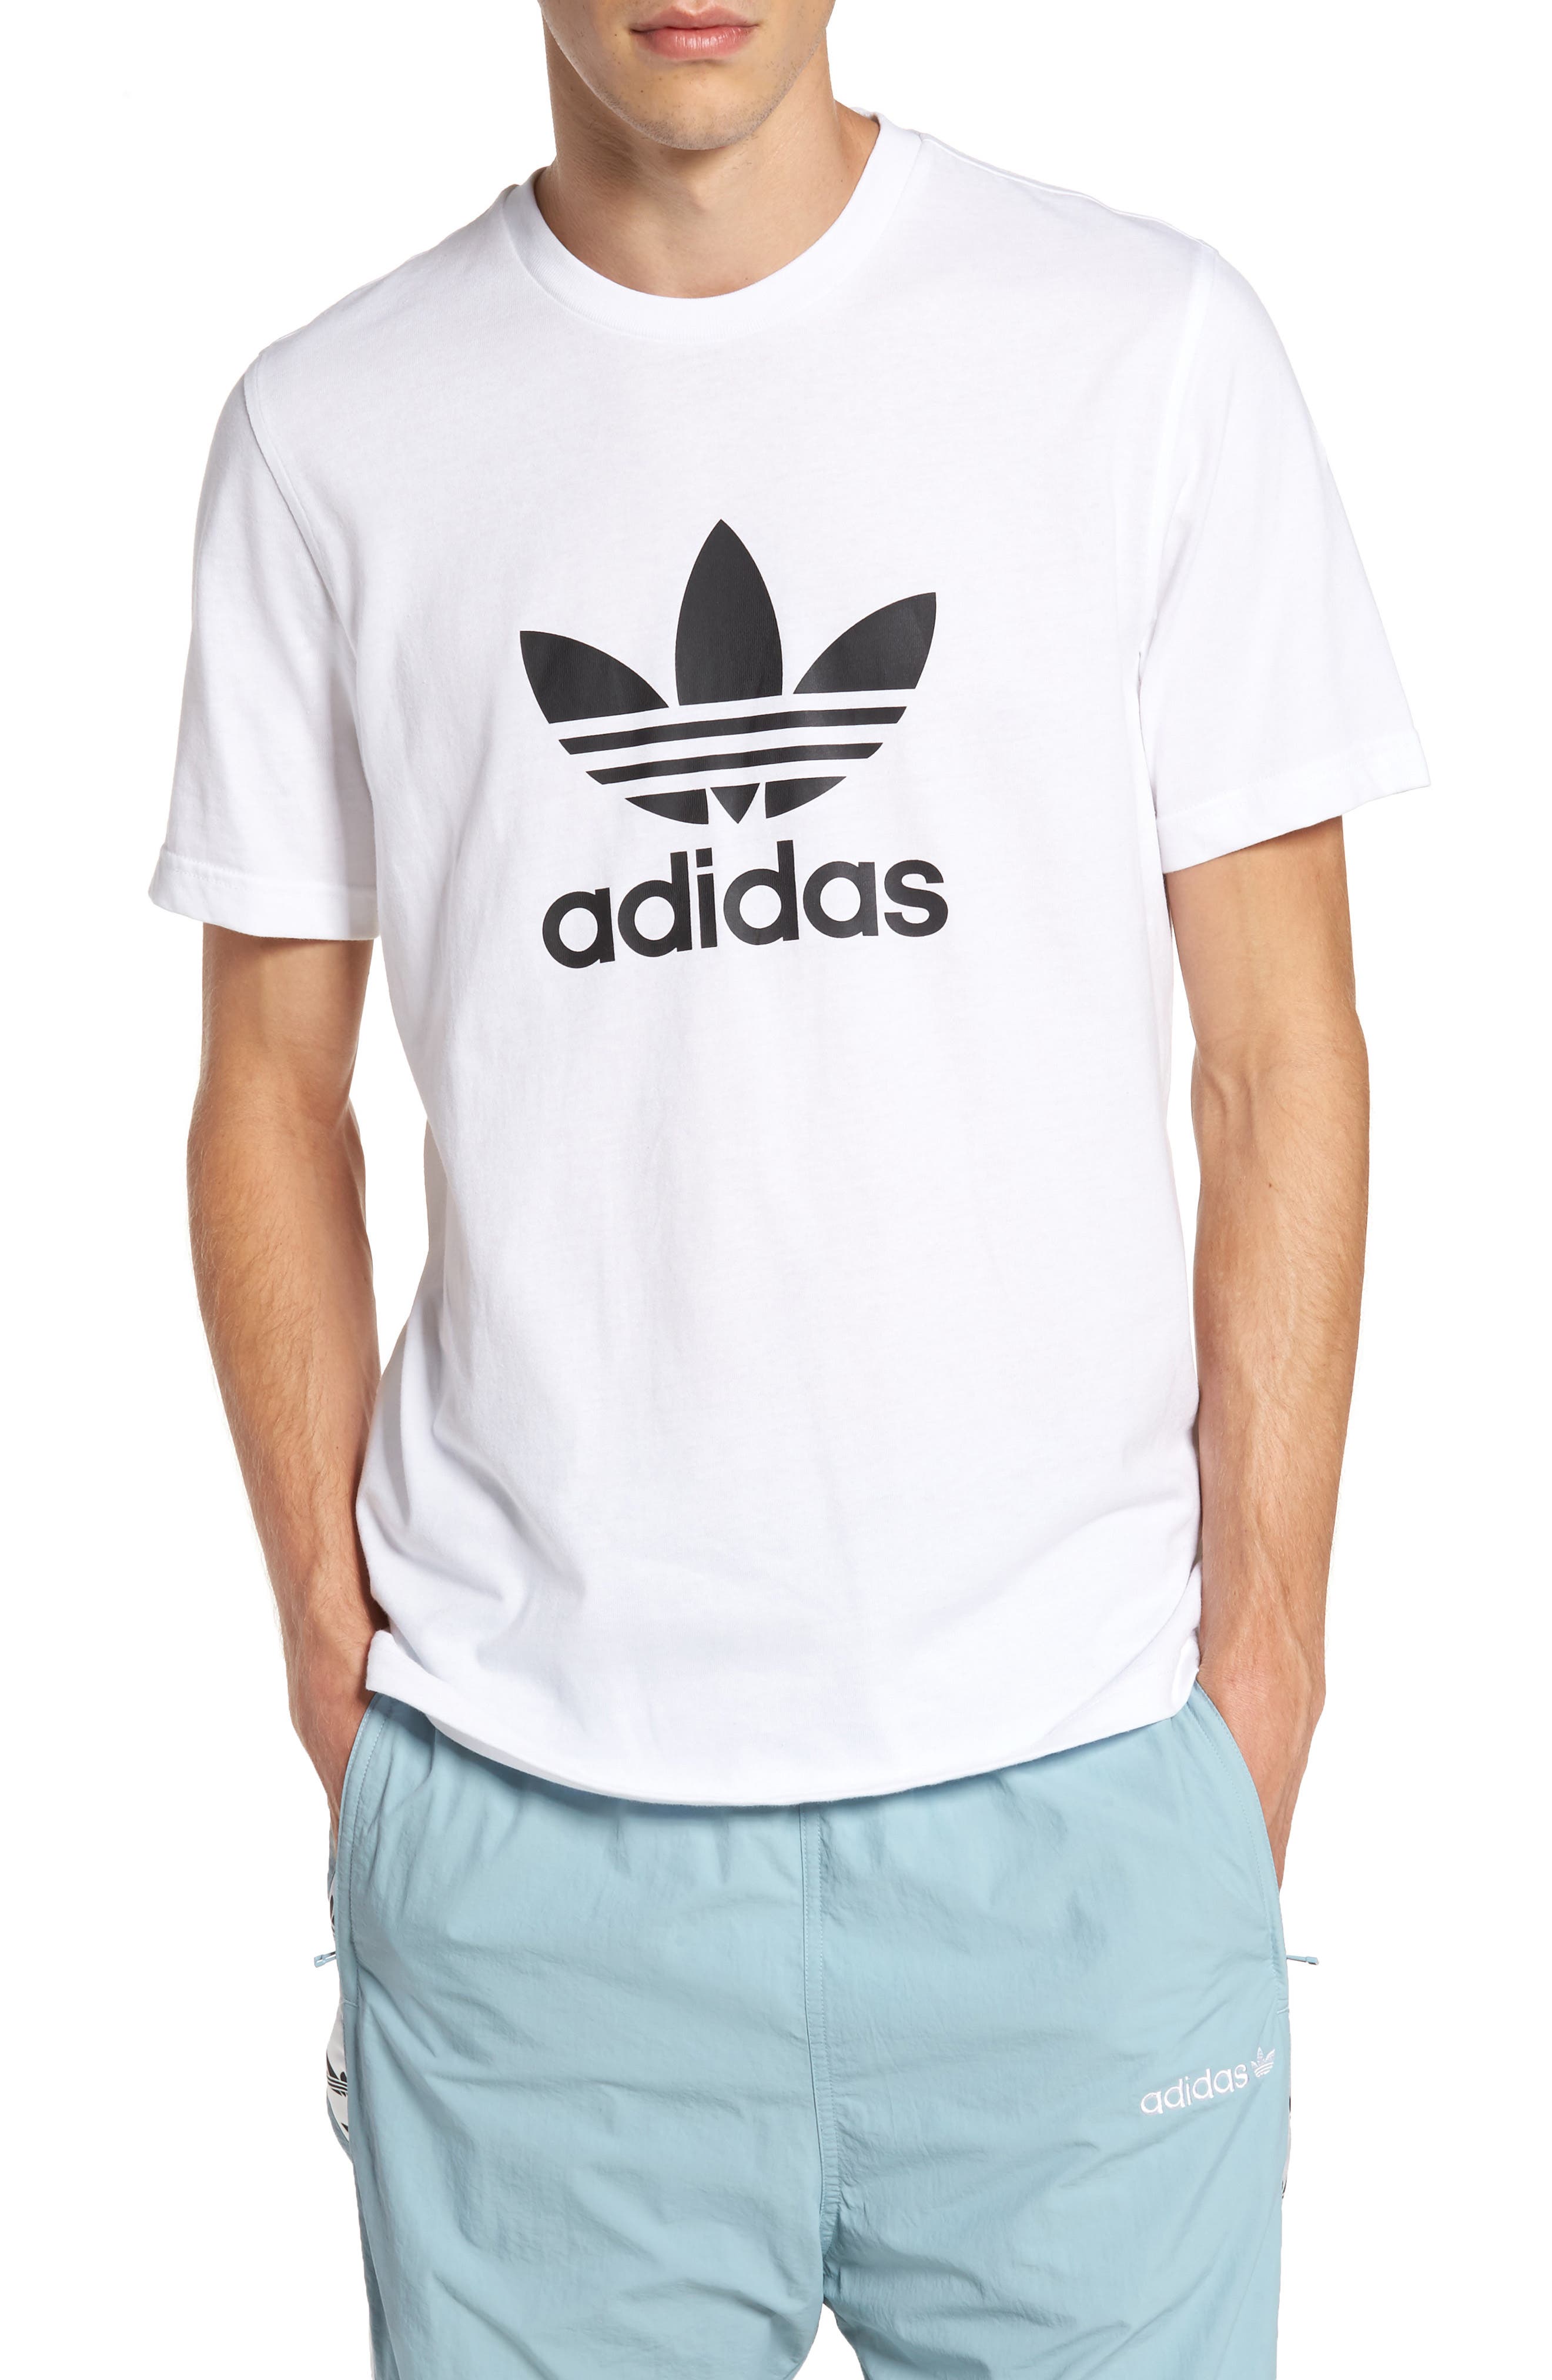 UPC 191034257741 product image for adidas Originals Trefoil Graphic T-Shirt in White at Nordstrom, Size Large | upcitemdb.com